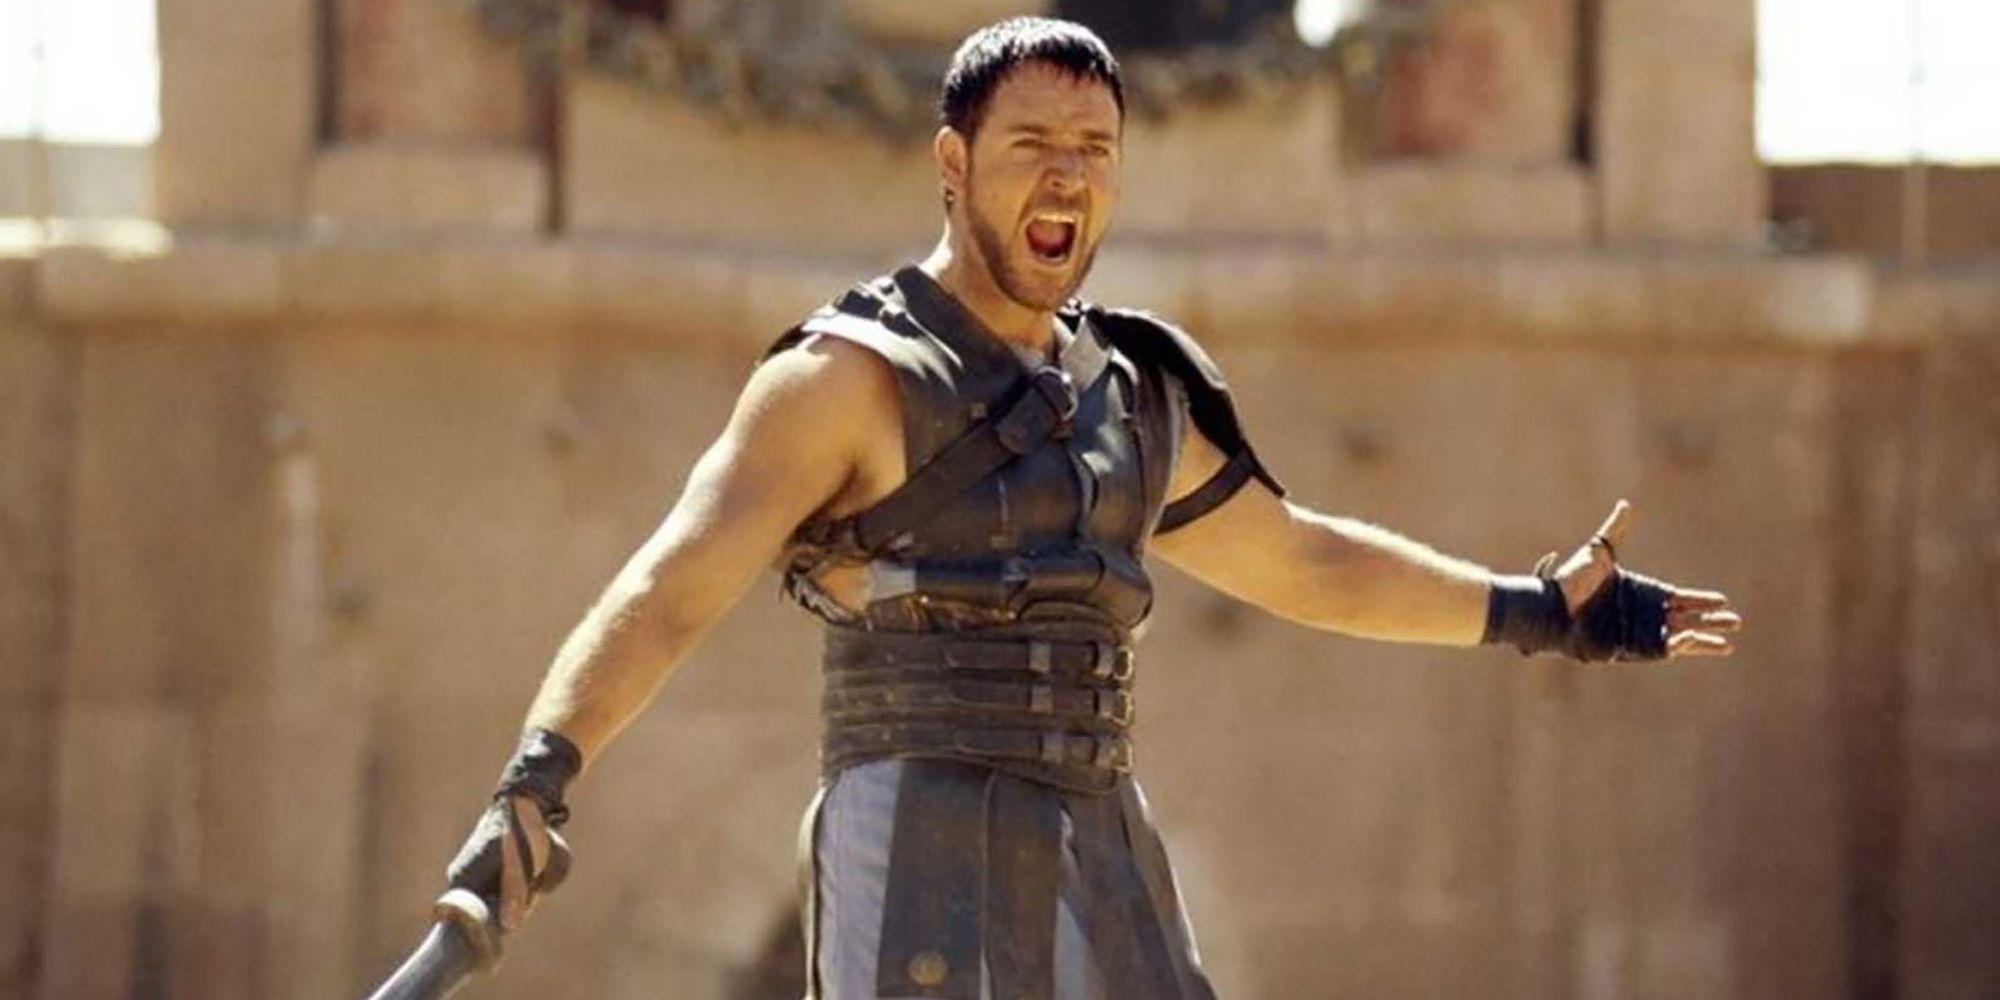 Russell Crowe in the arena in Gladiator